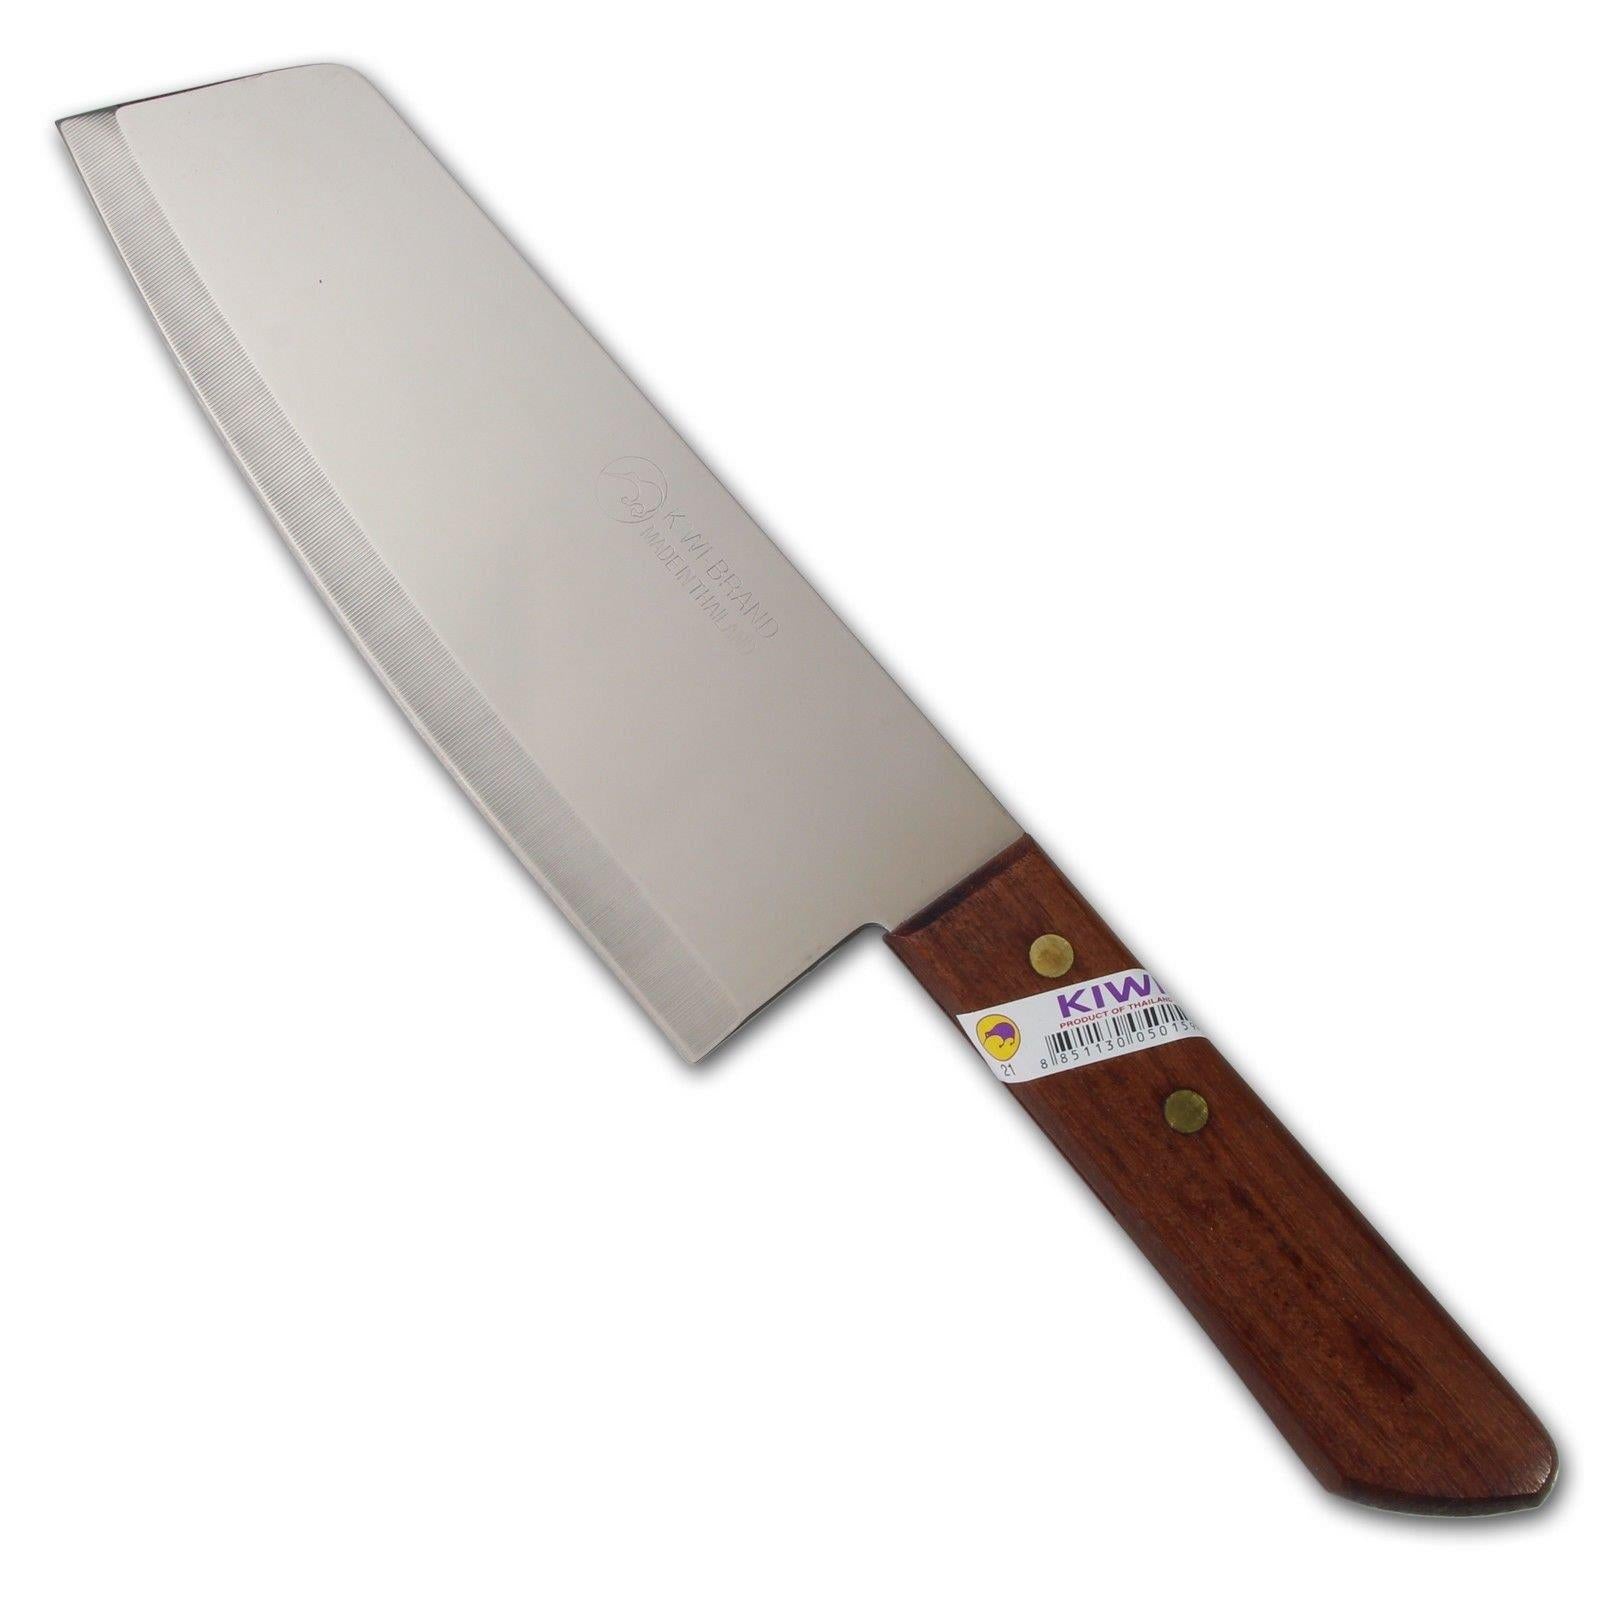 Thai Cook Kitchen Chef Knife Stainless Steel Wood Handle Kiwi Brand No. 21